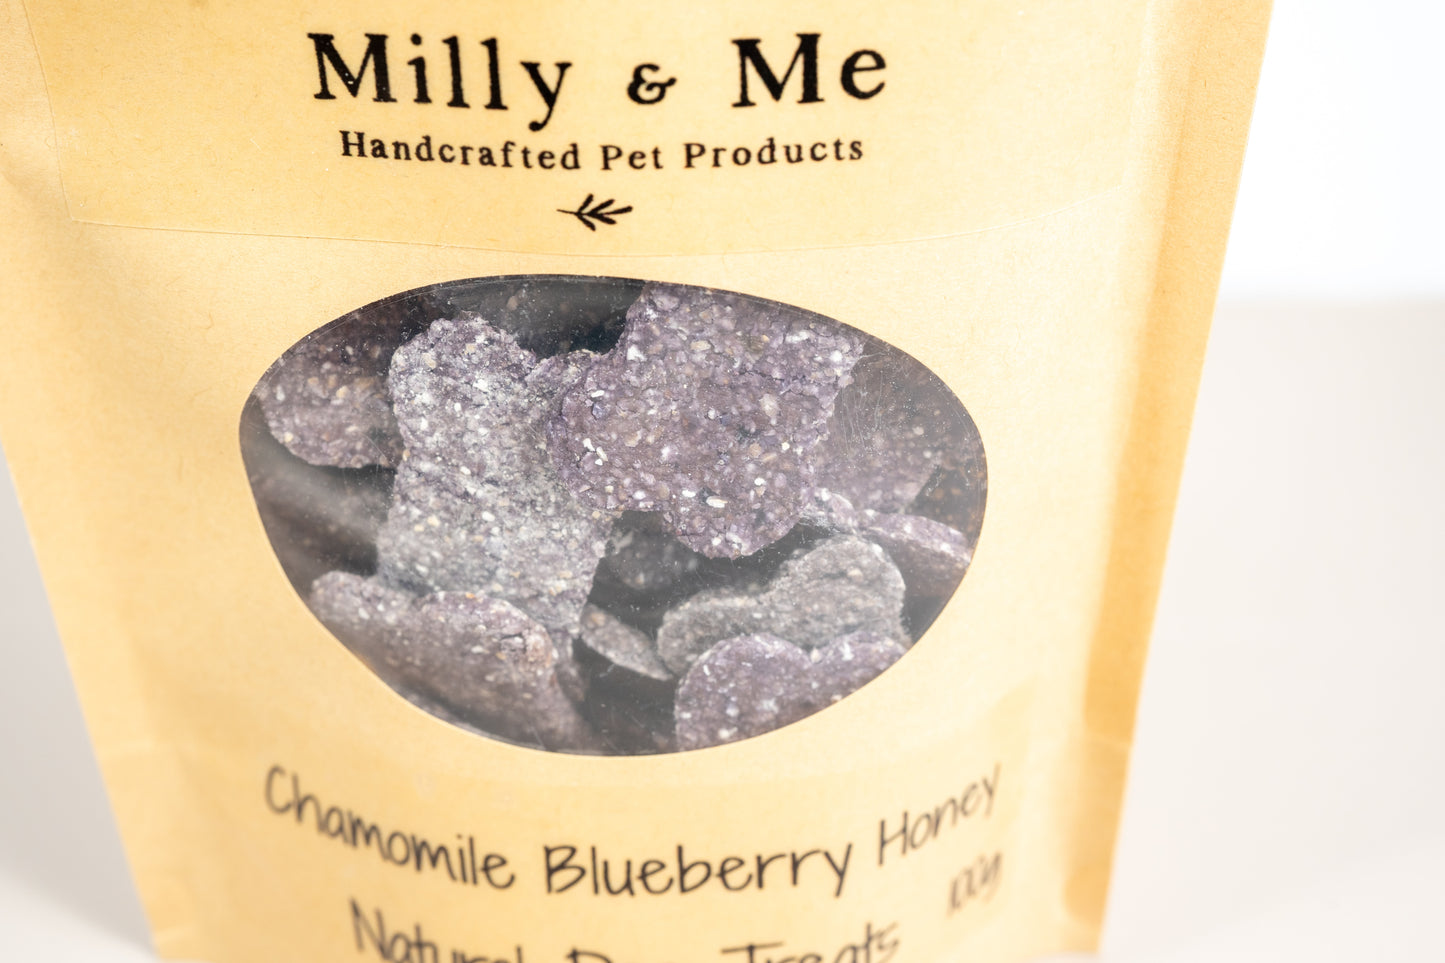 Close-up view of the chamomile blueberry honey dog treats.